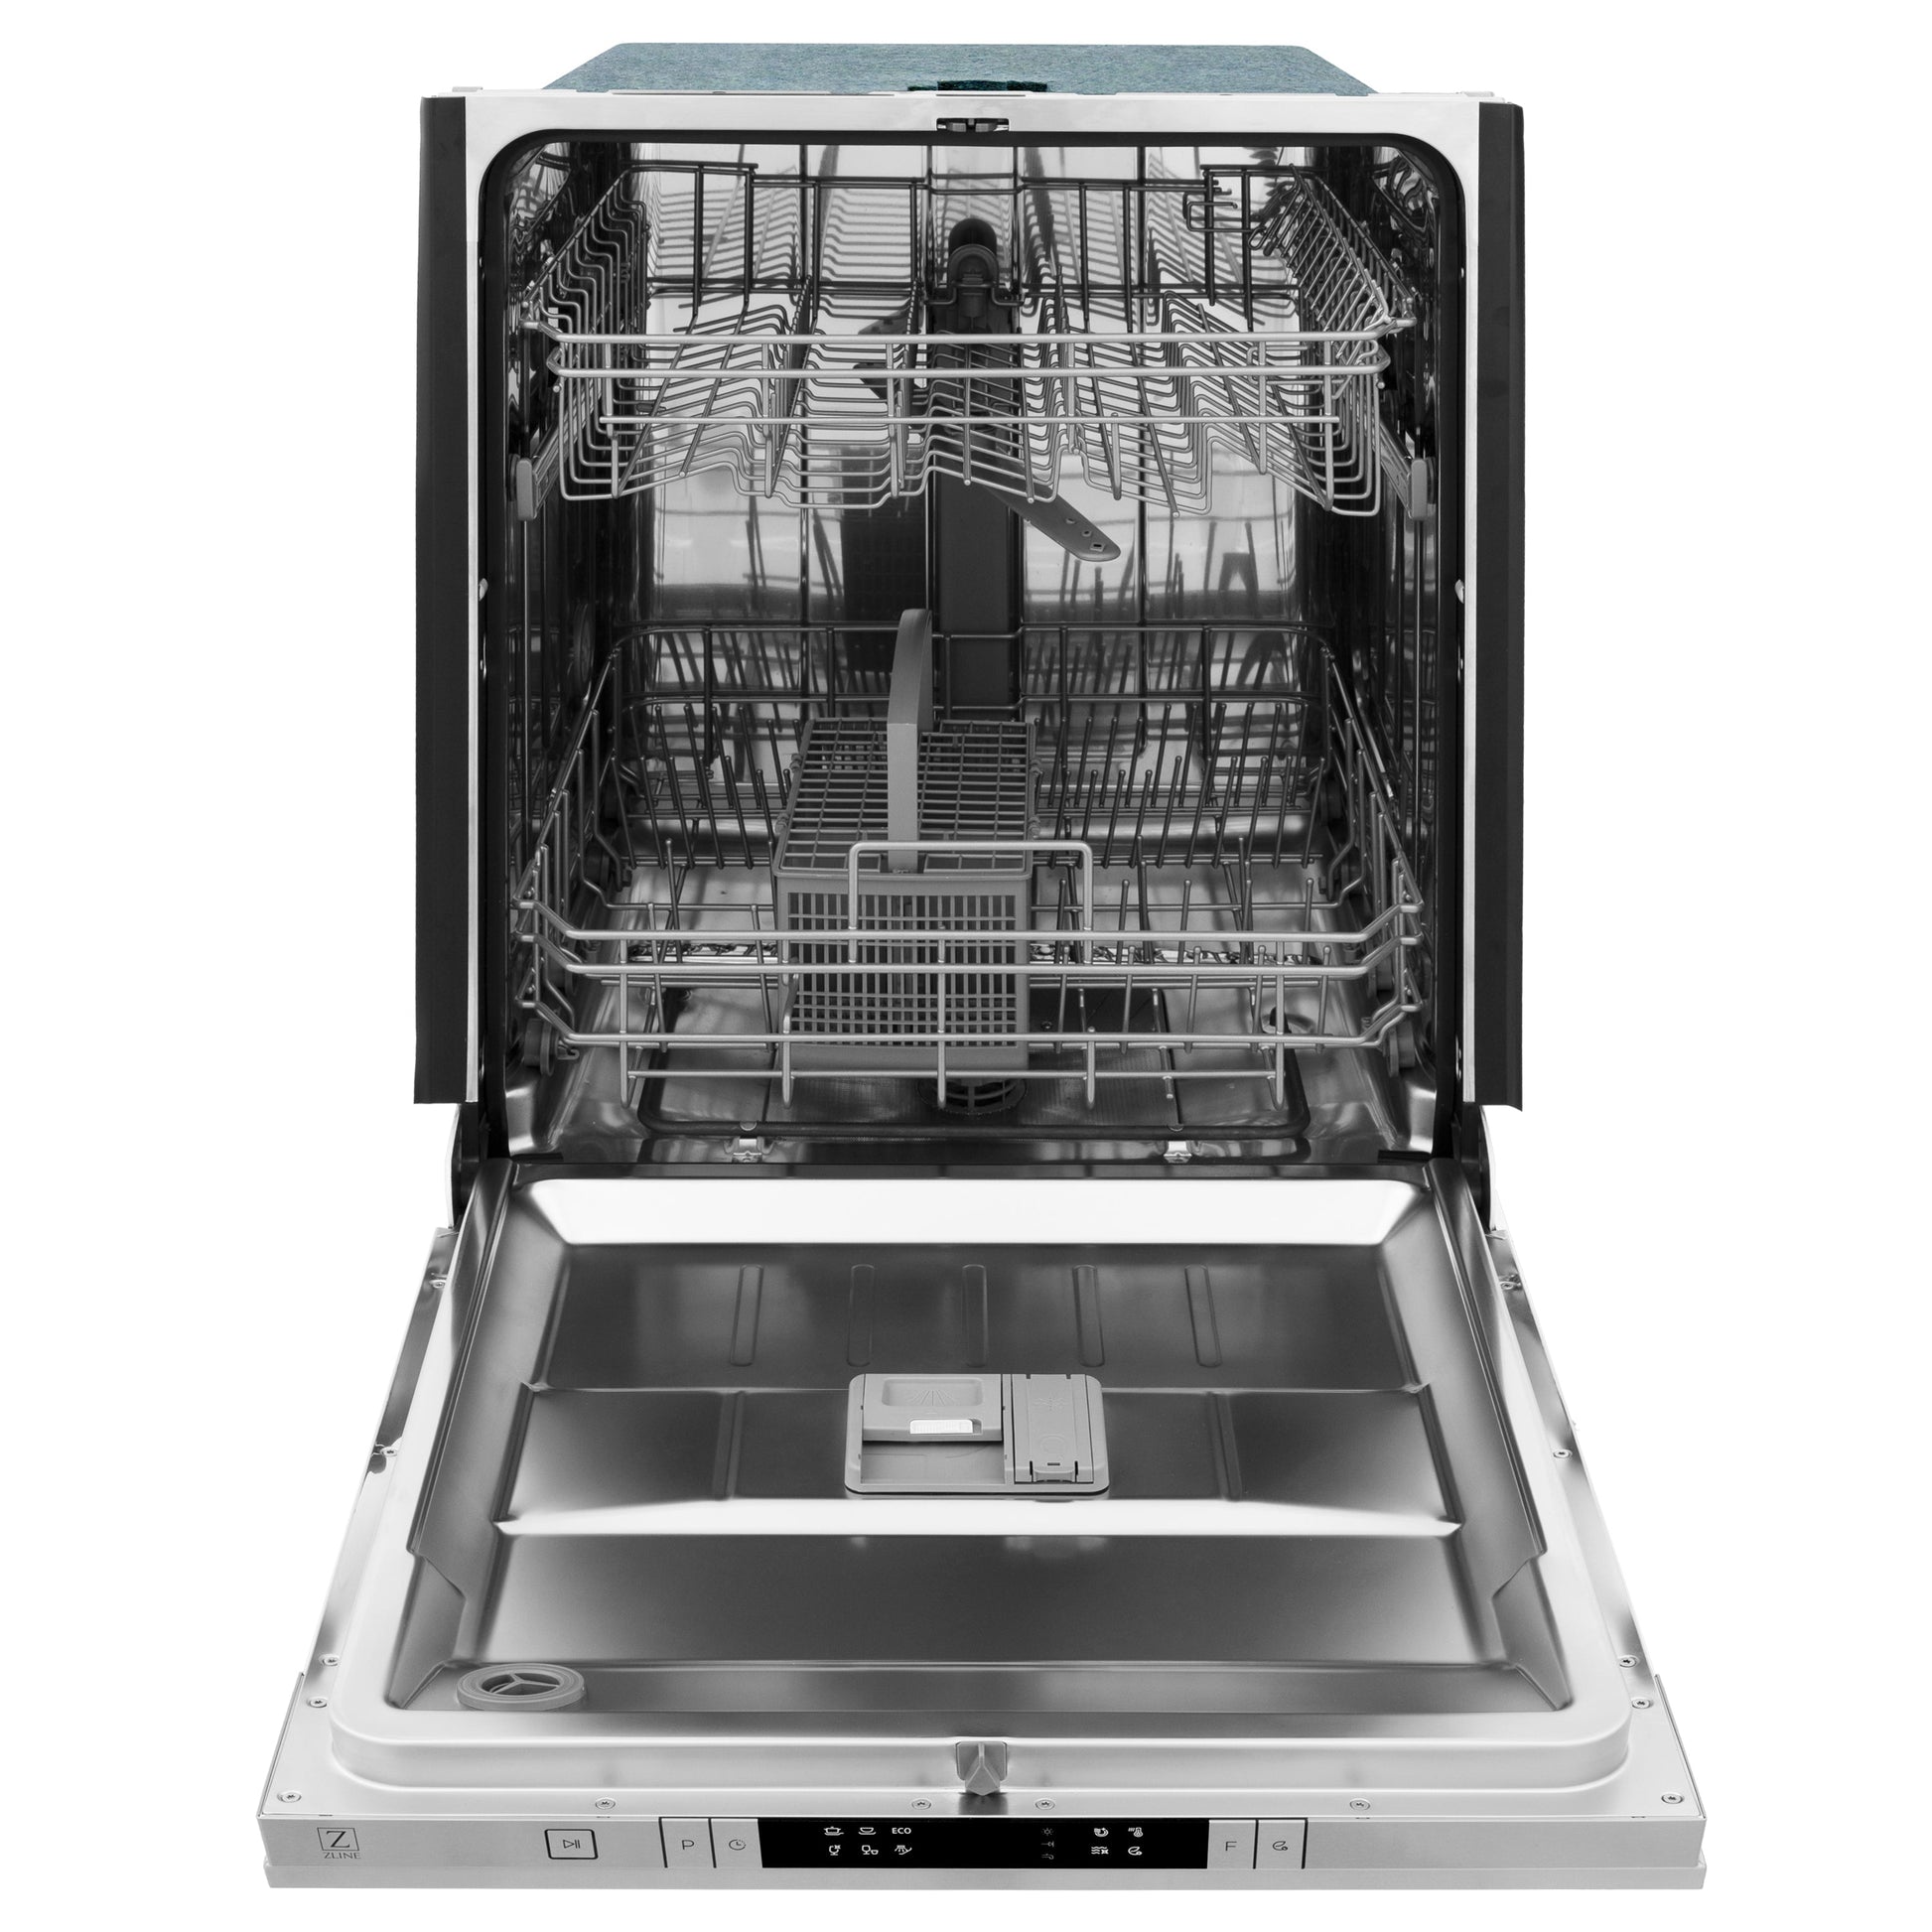 ZLINE 3-Appliance 30" Kitchen Package with Stainless Steel Dual Fuel Range, Modern Over The Range Microwave, and Tall Tub Dishwasher